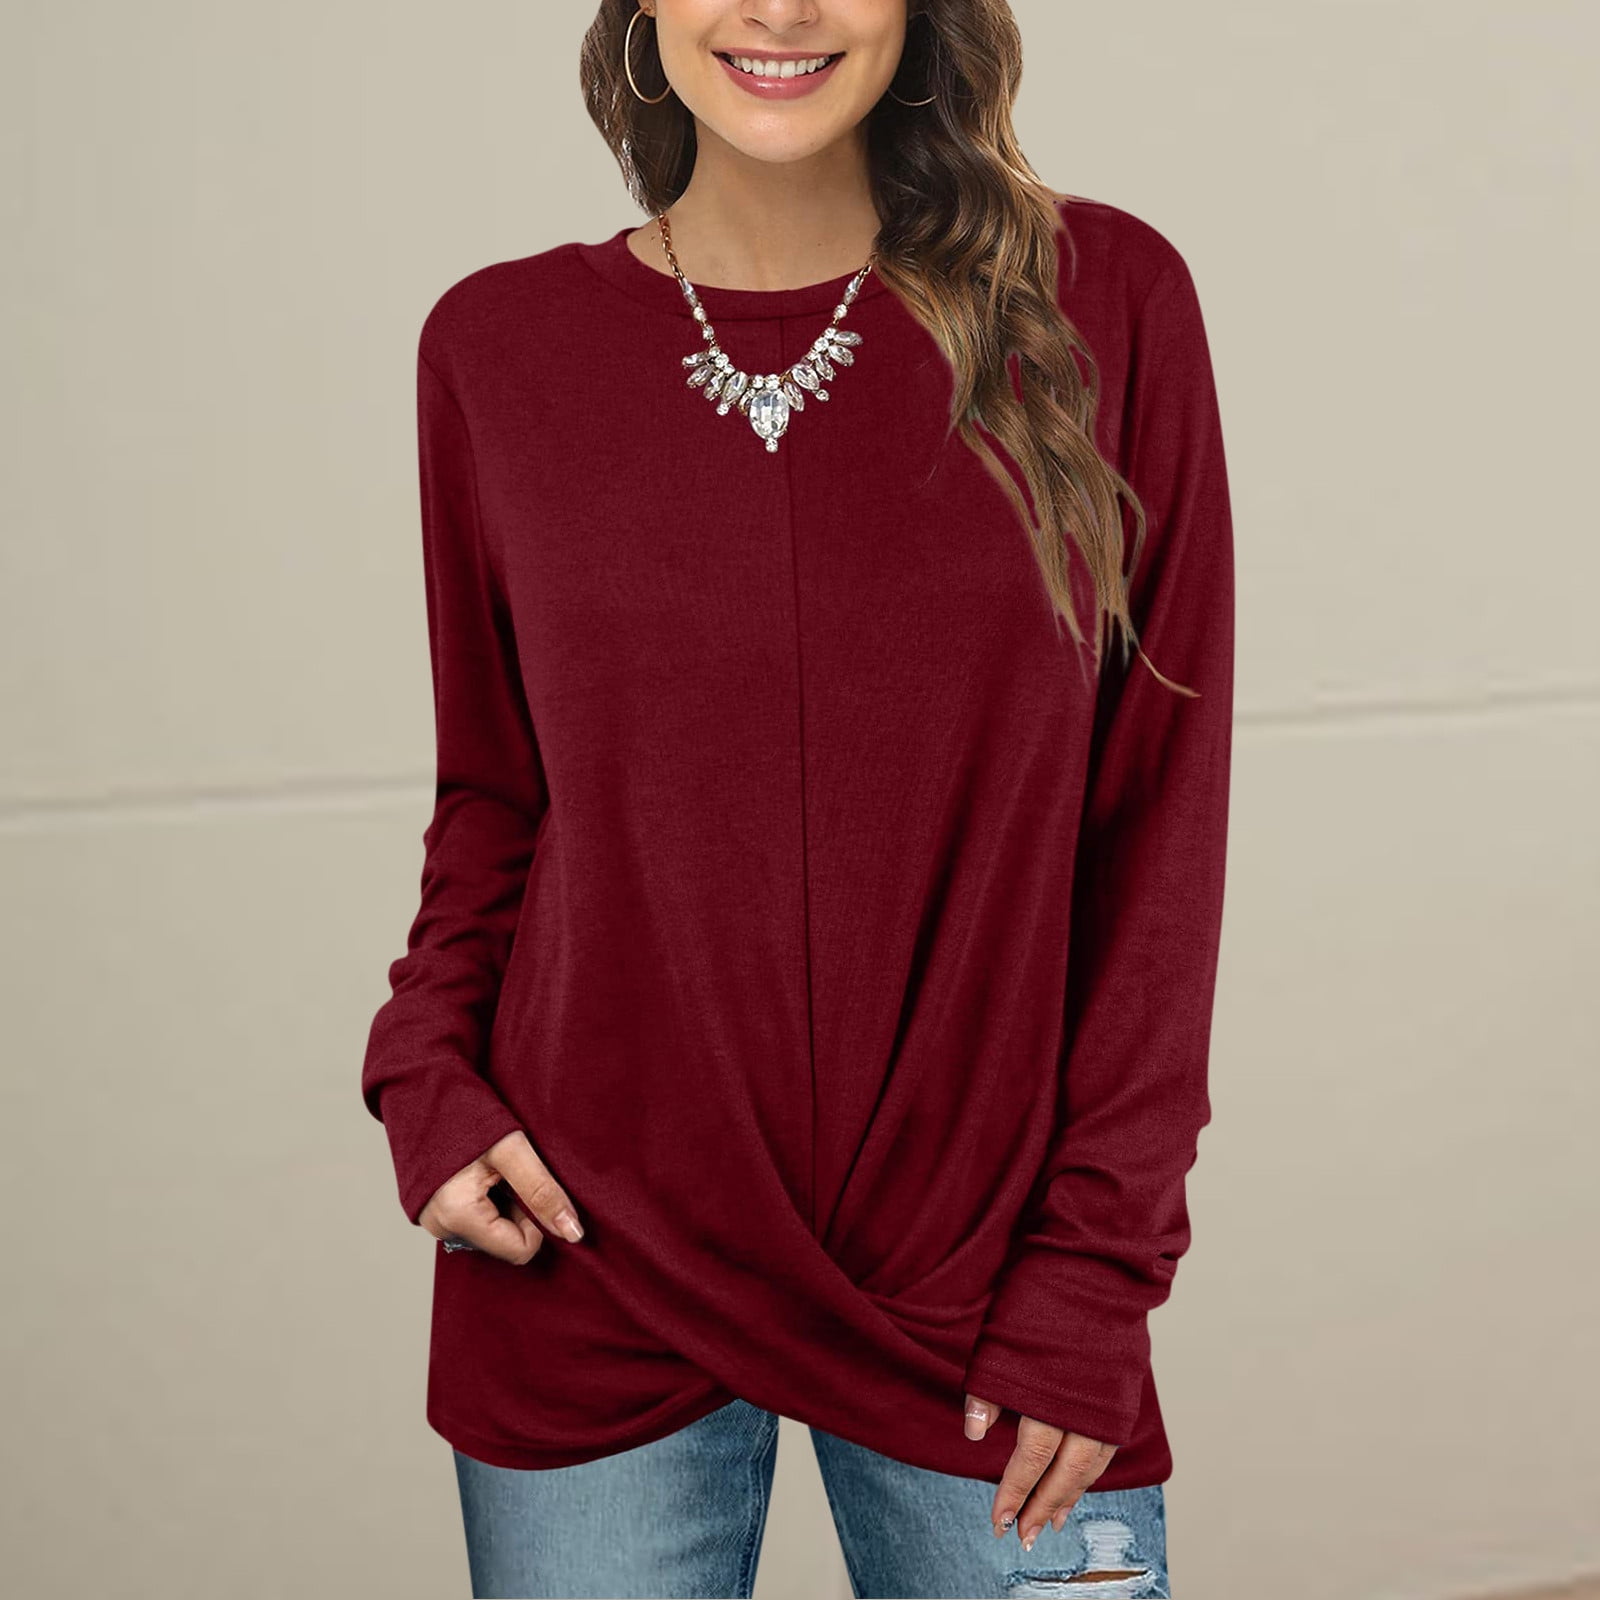 Tunic Tops For Leggings For Women Front Long Sleeve O-Neck Shirts 